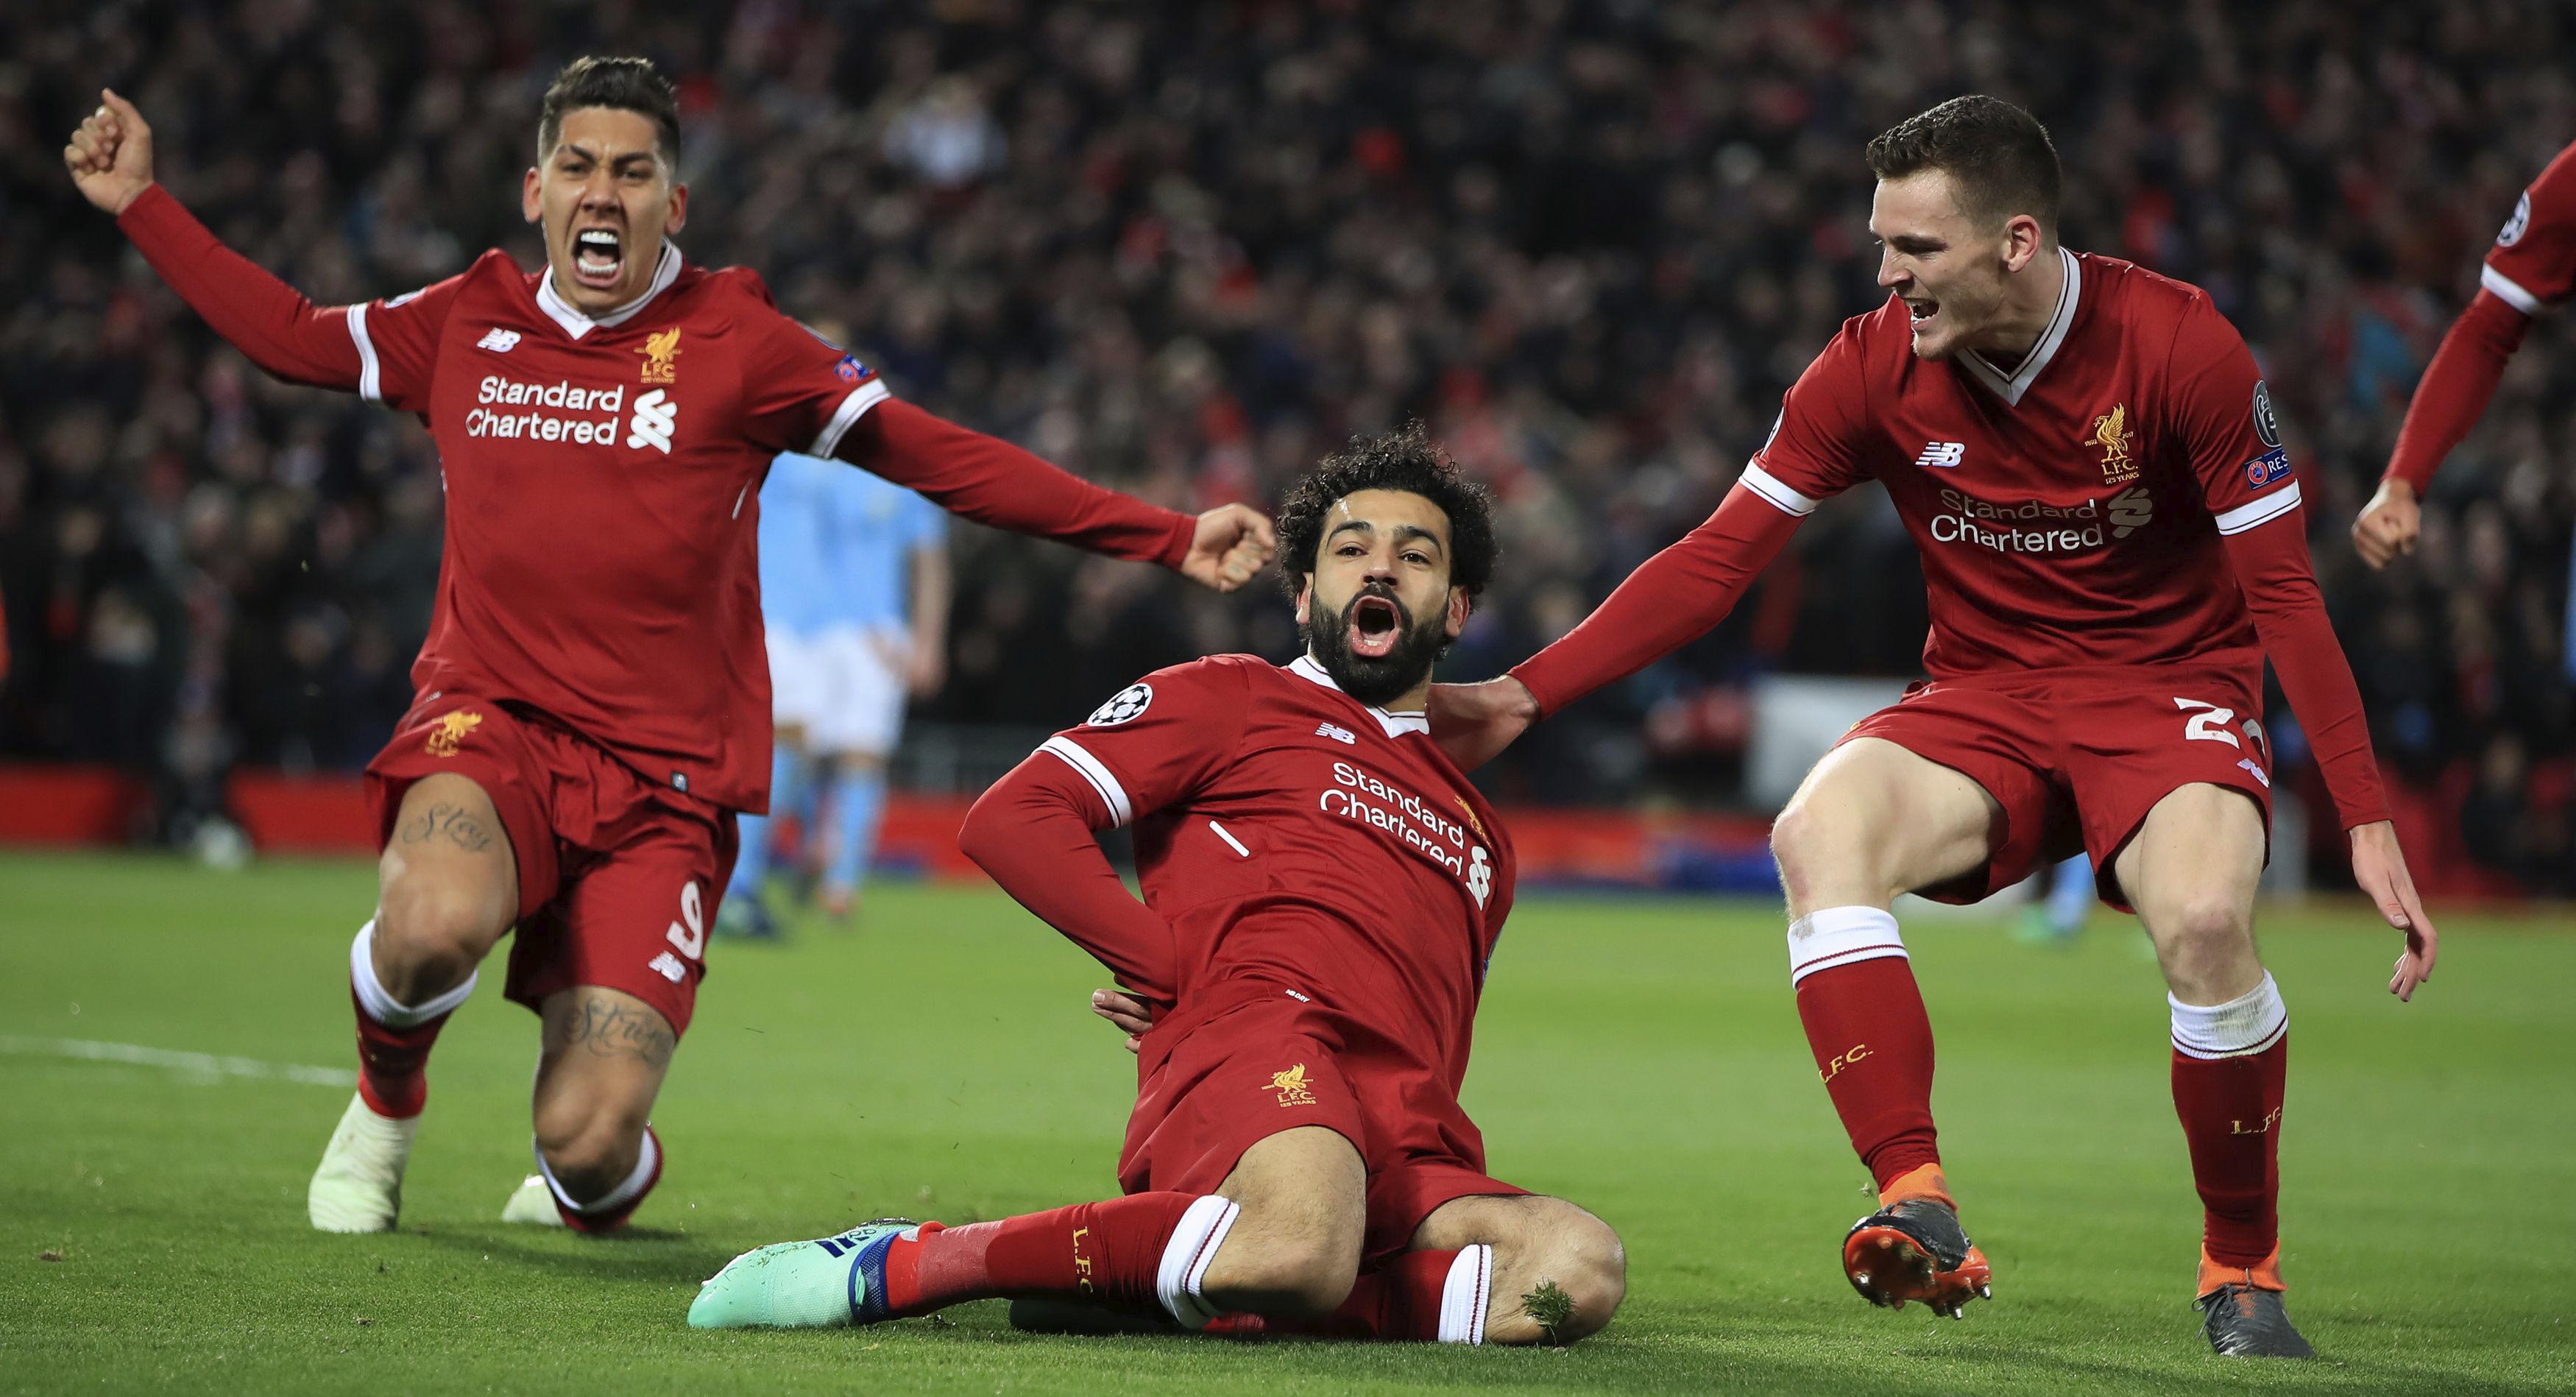 Liverpool blows away Man City in 3-0 win in UCL quarterfinals | The Spokesman-Review